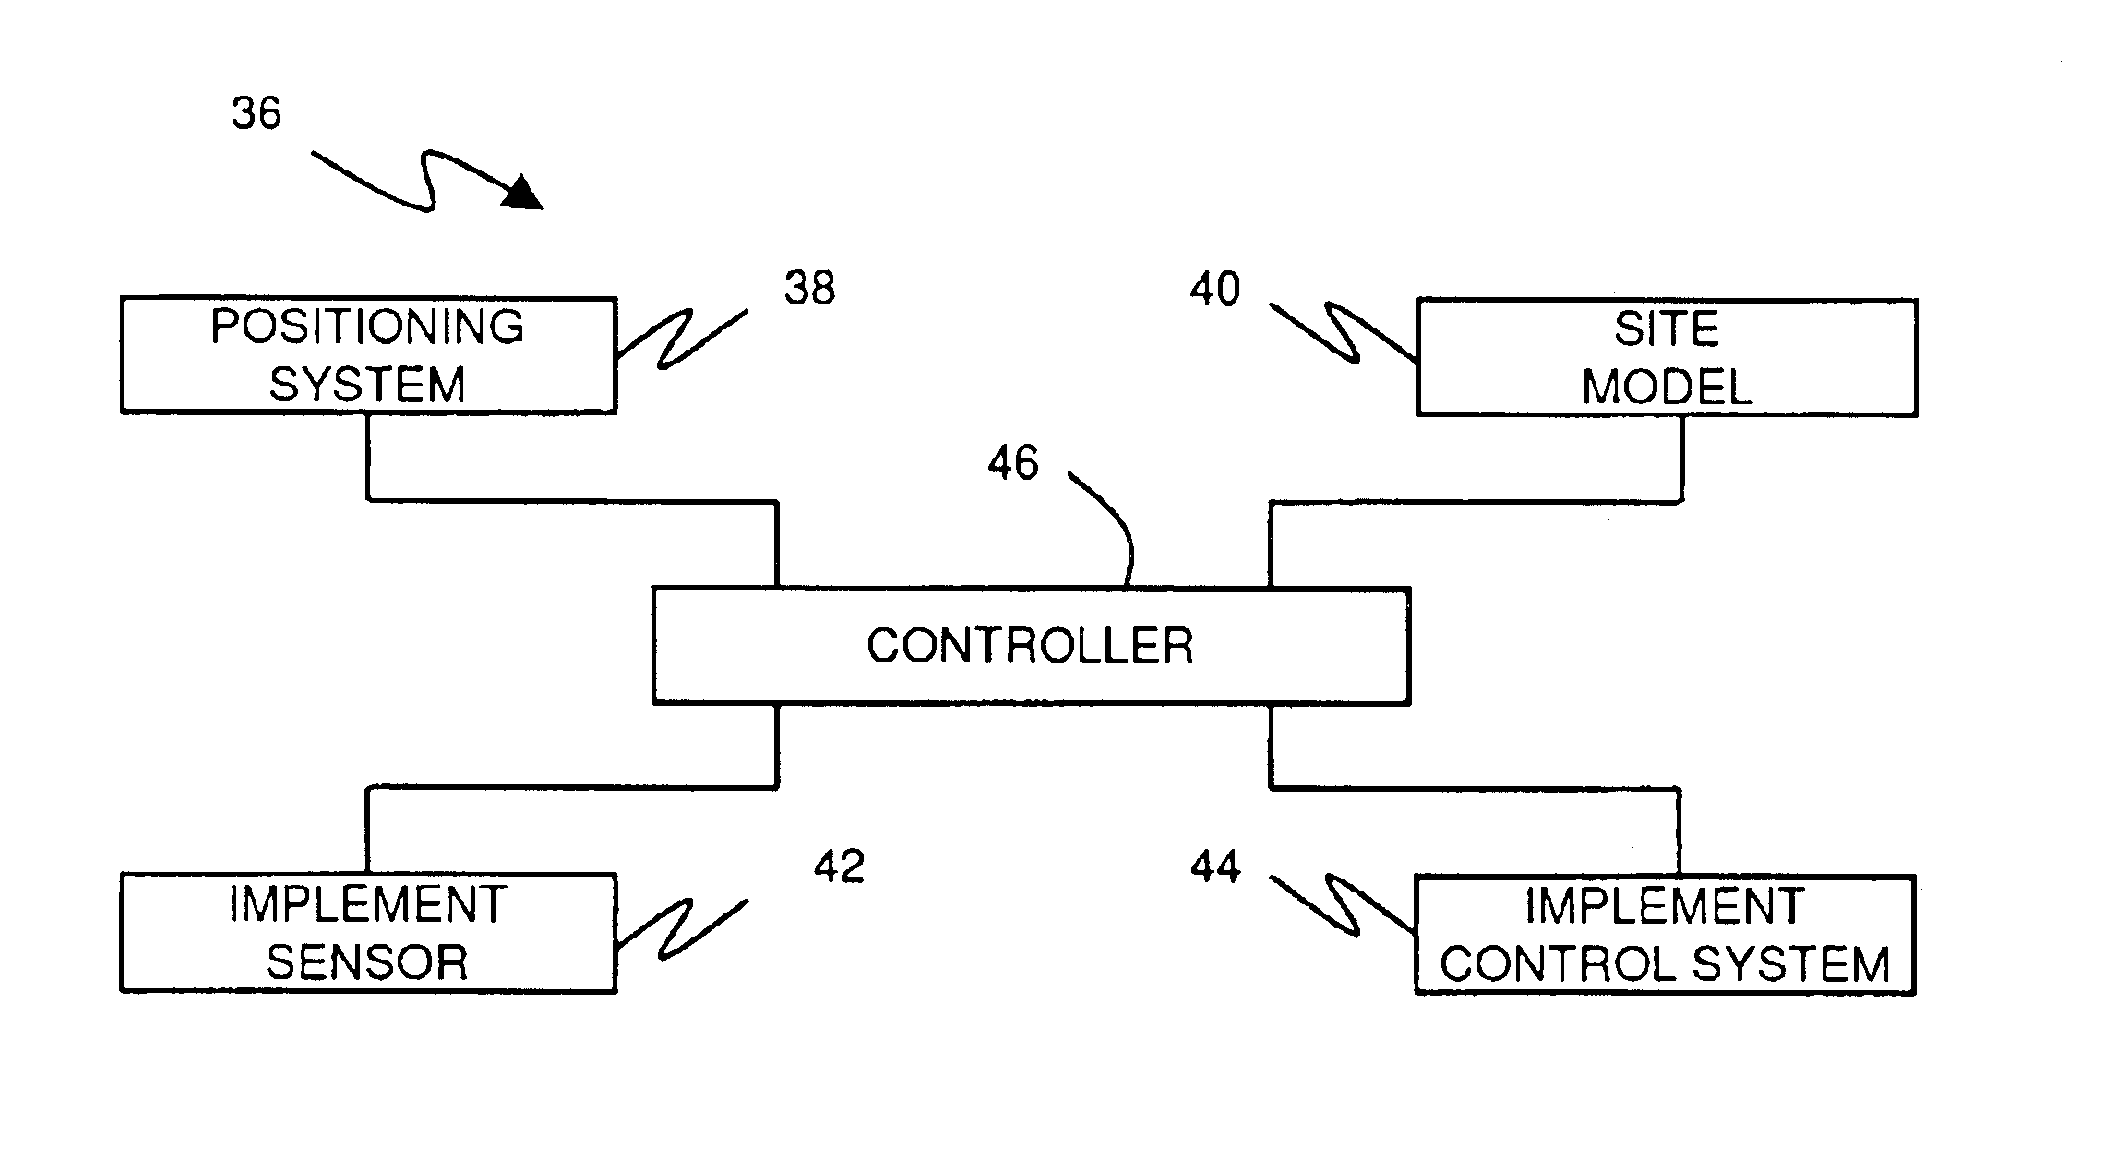 Site profile based control system and method for controlling a work implement